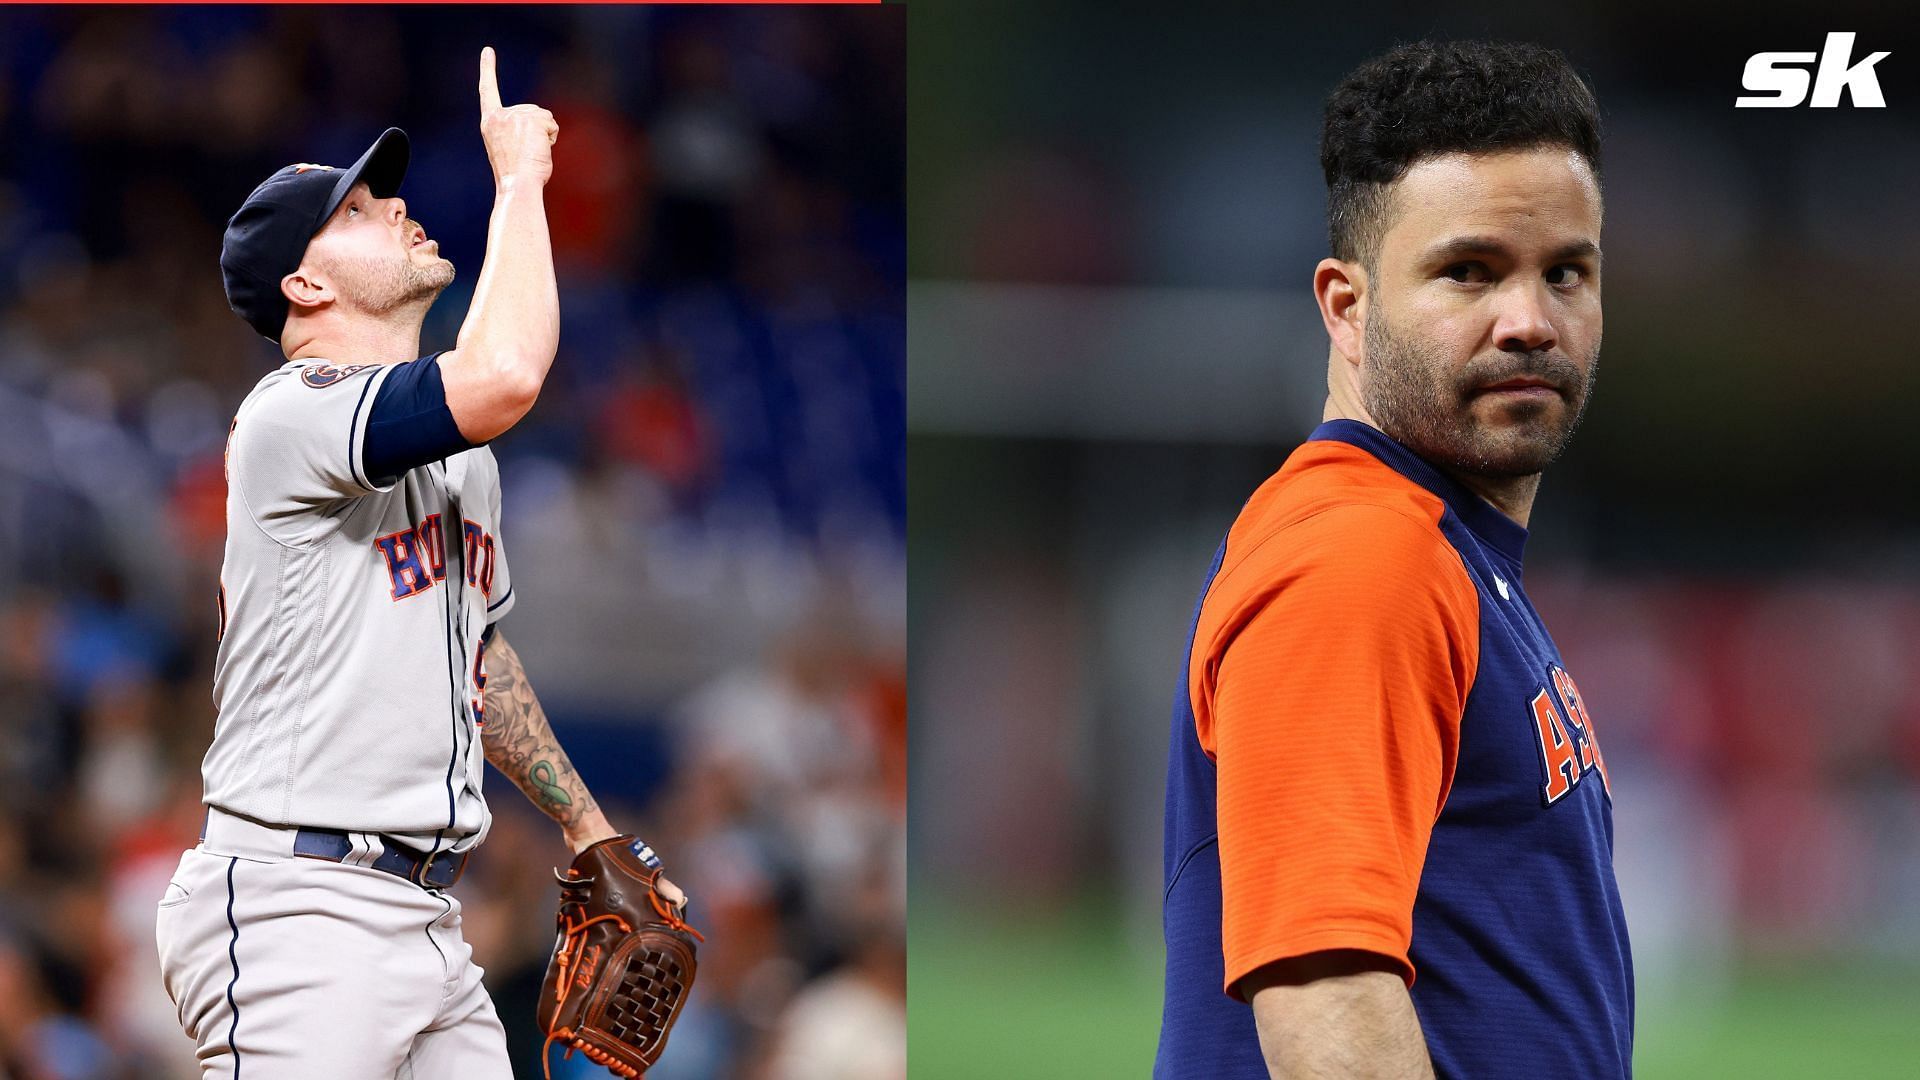 Ryan Pressly has come to the defense of Jose Altuve after the second baseman made a crucial error during the week